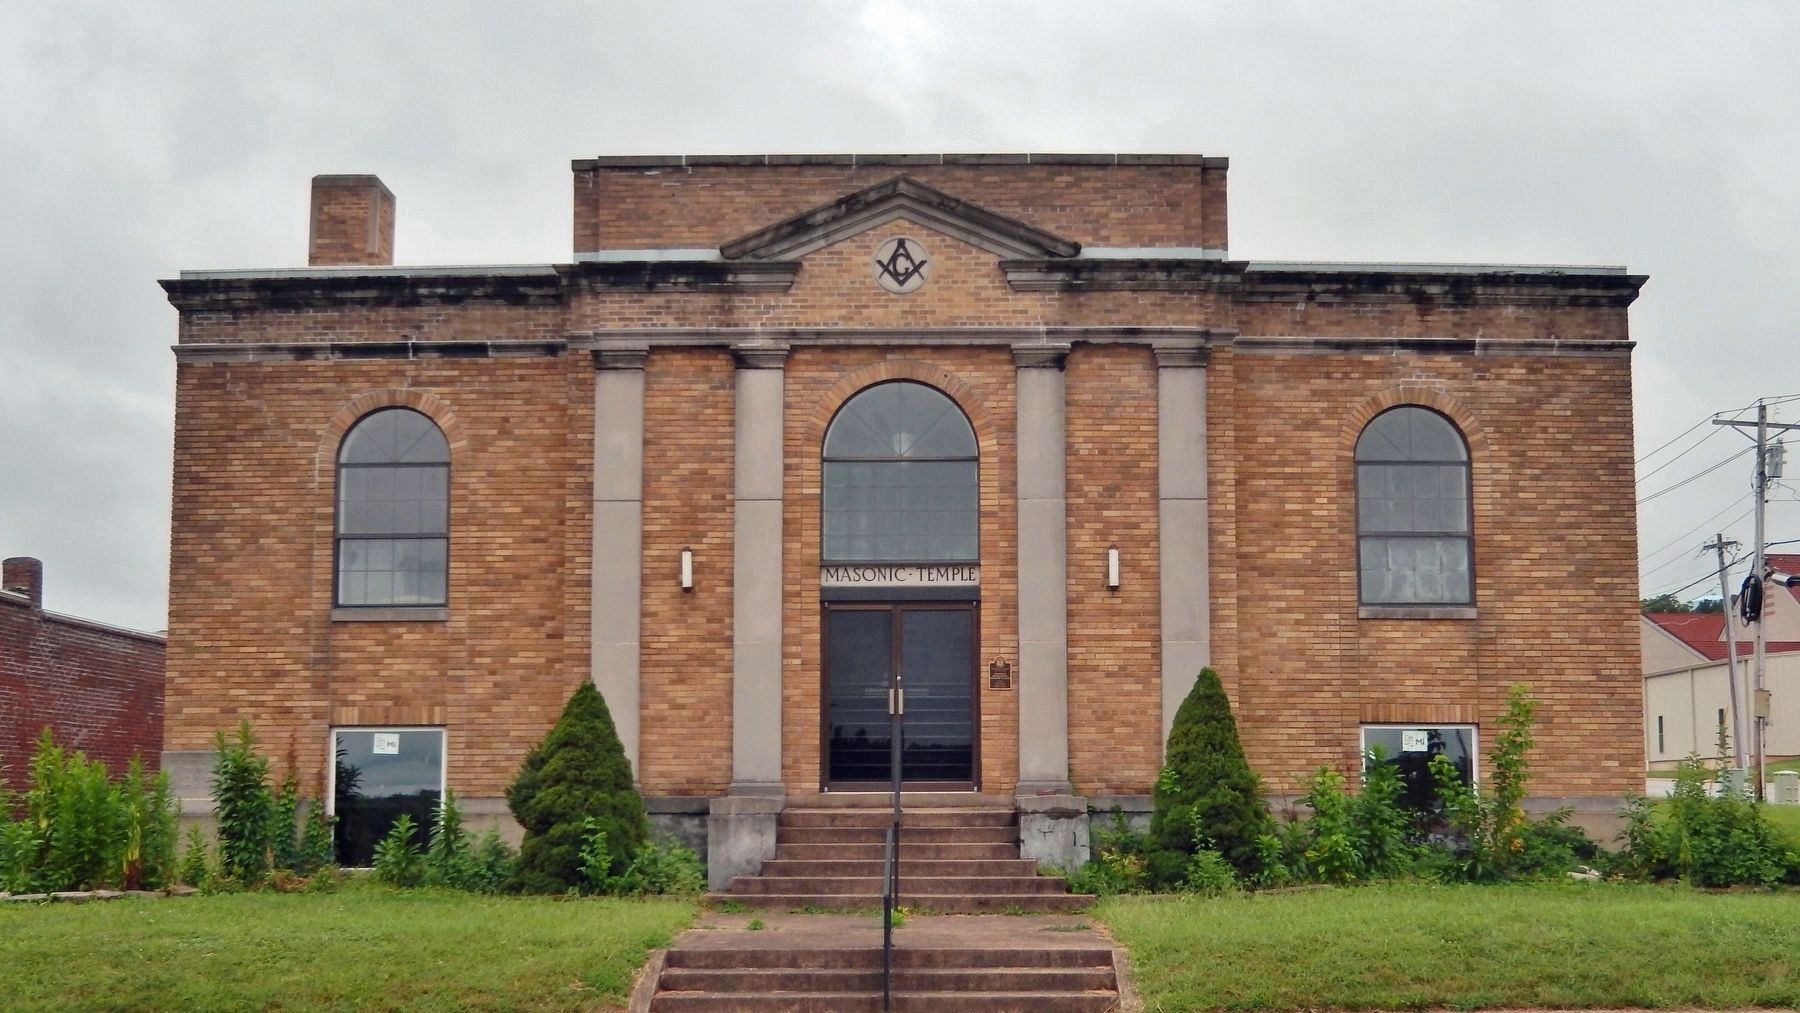 Mount Zion Lodge Masonic Temple (<i>north/front elevation</i>) image. Click for full size.